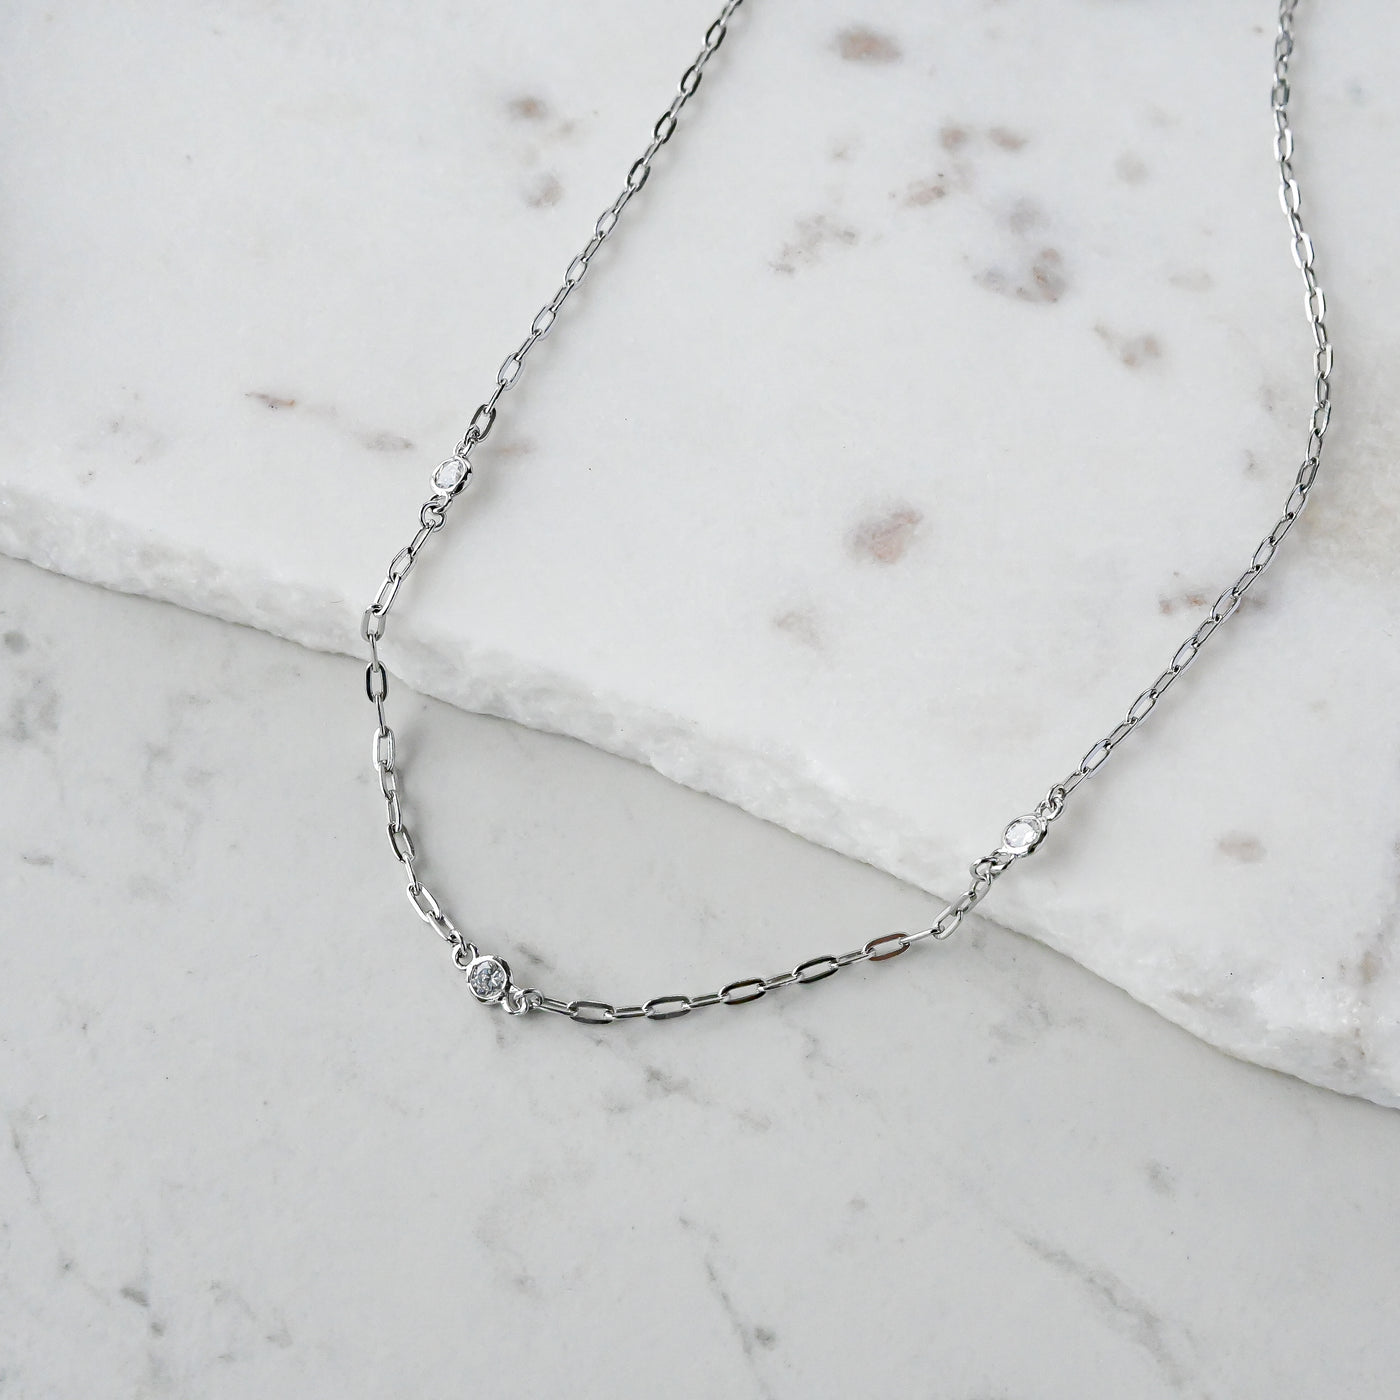 Crystal Silver Chain Necklace